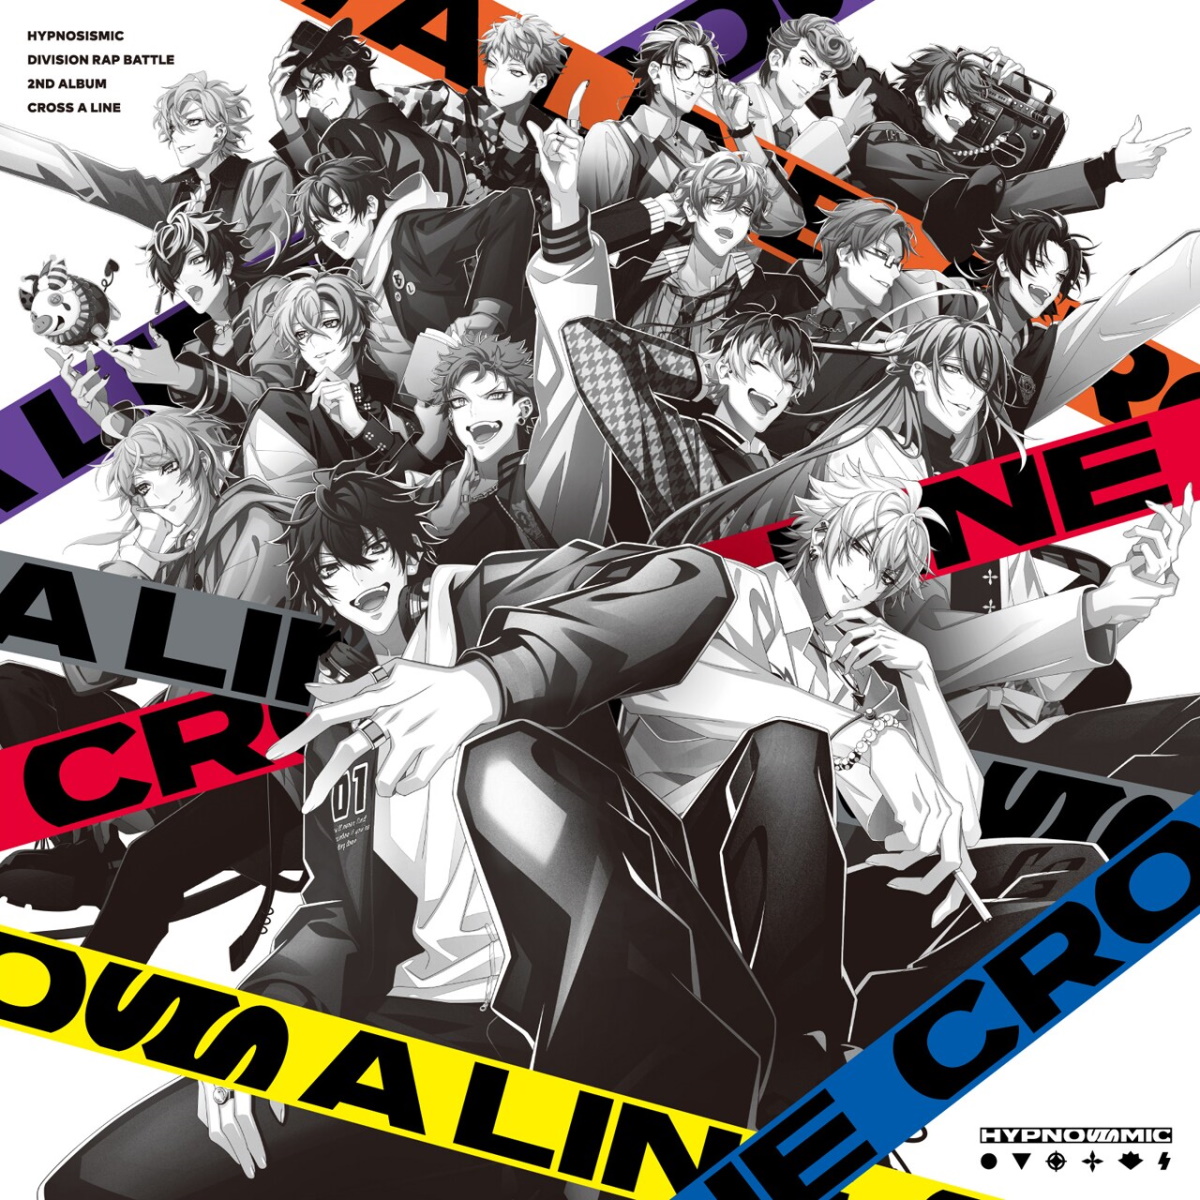 Cover for『Fling Posse - Torima Get on the floor』from the release『CROSS A LINE』